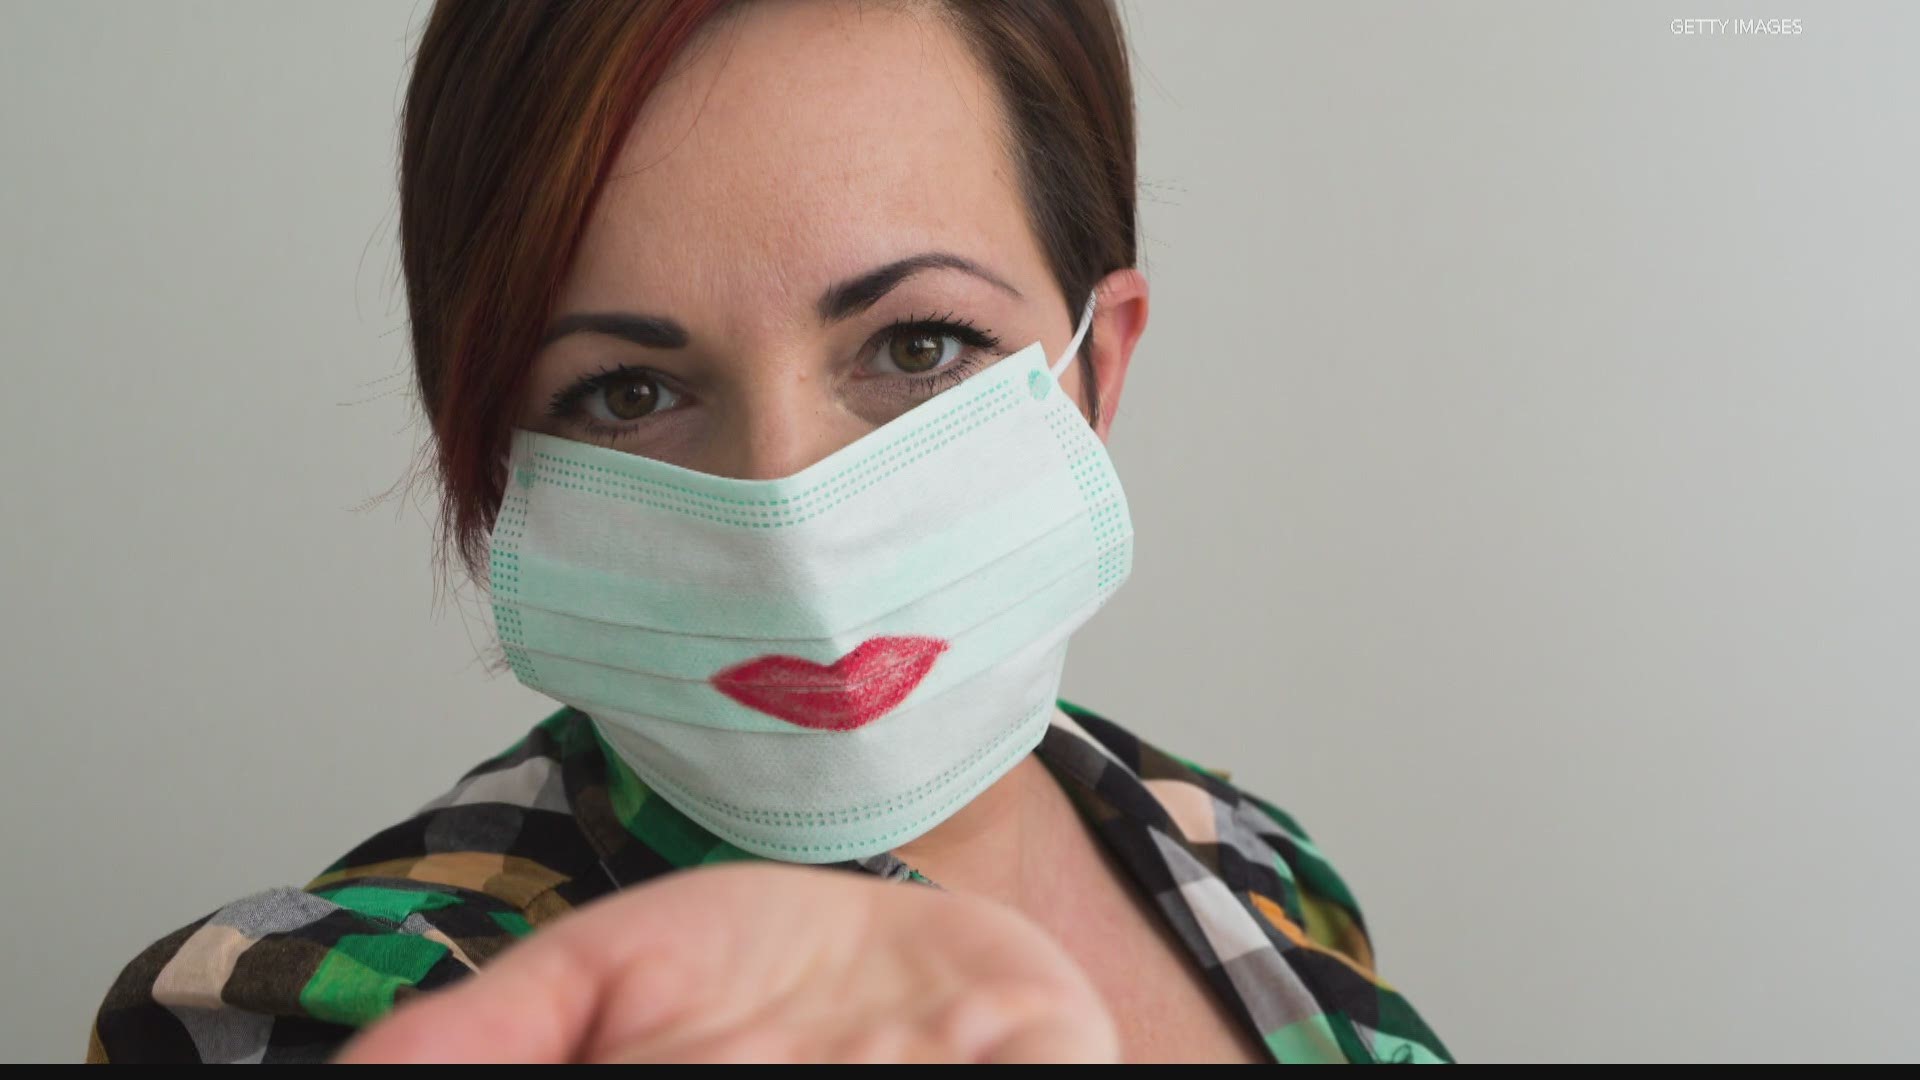 After witnessing the illnesses and deaths firsthand, health care workers are convinced your face mask will help stop the spread of the coronavirus.